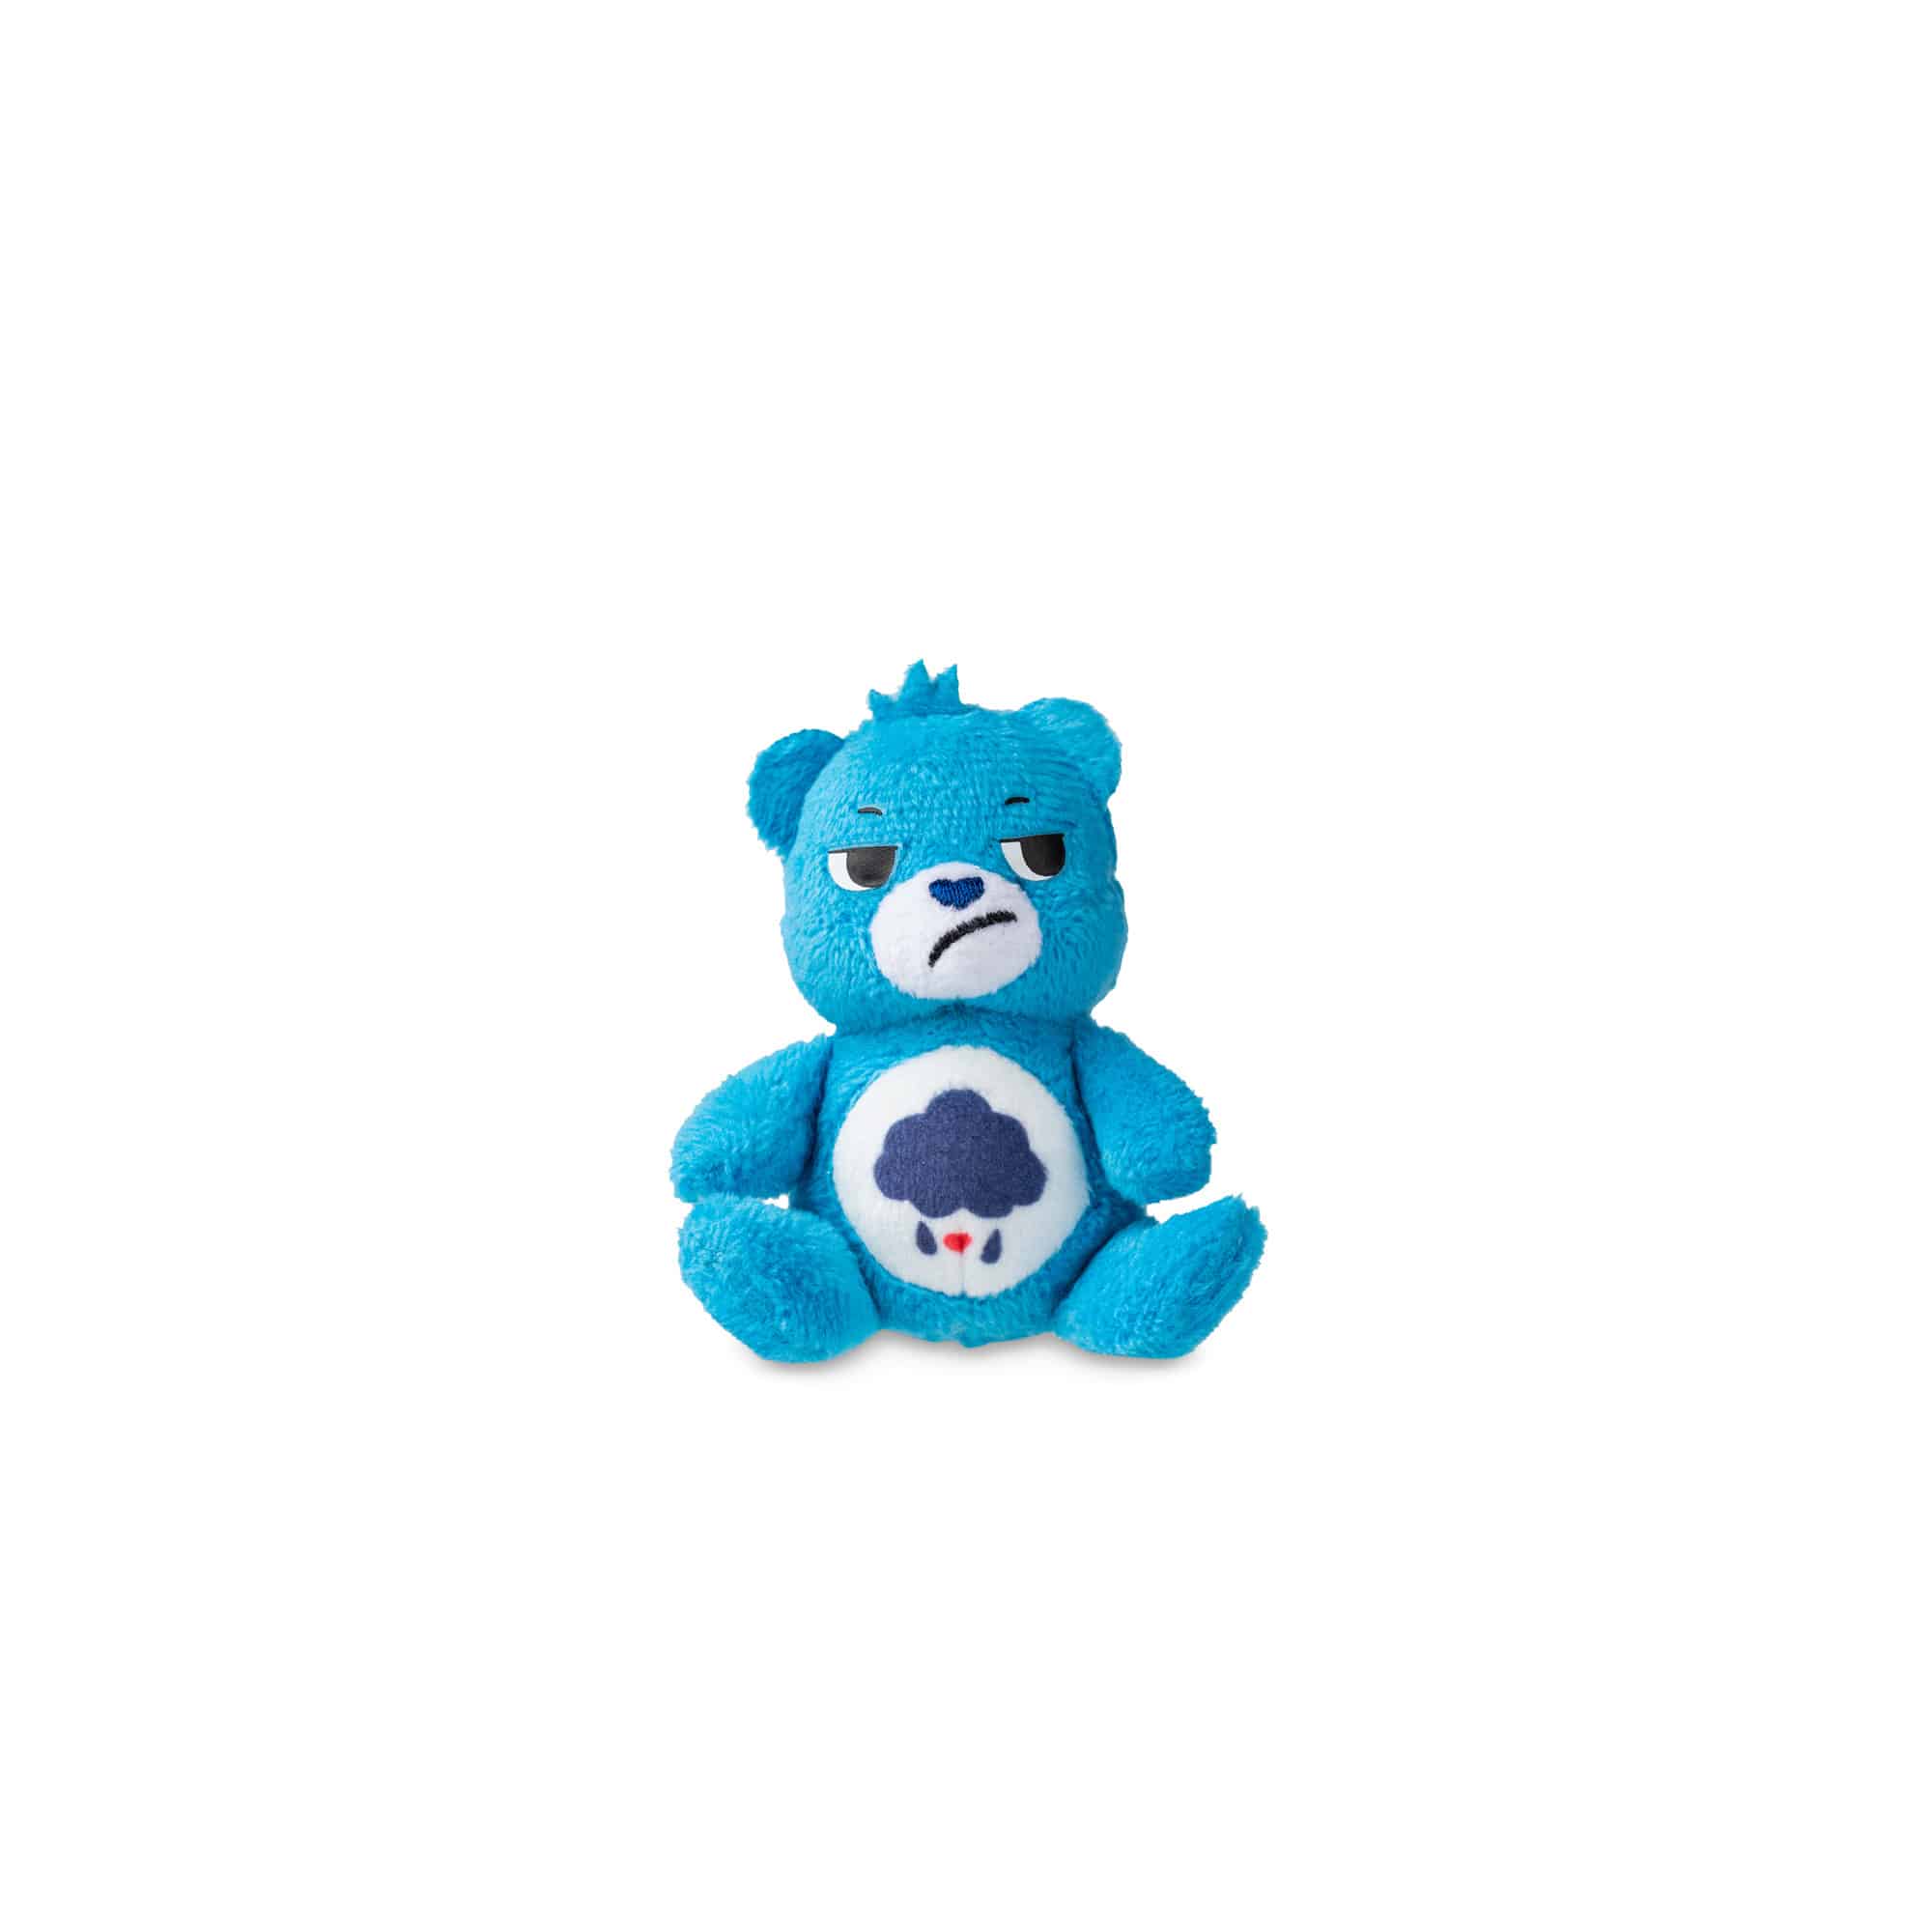 Care Bears Collectible Figure Pack - Schylling